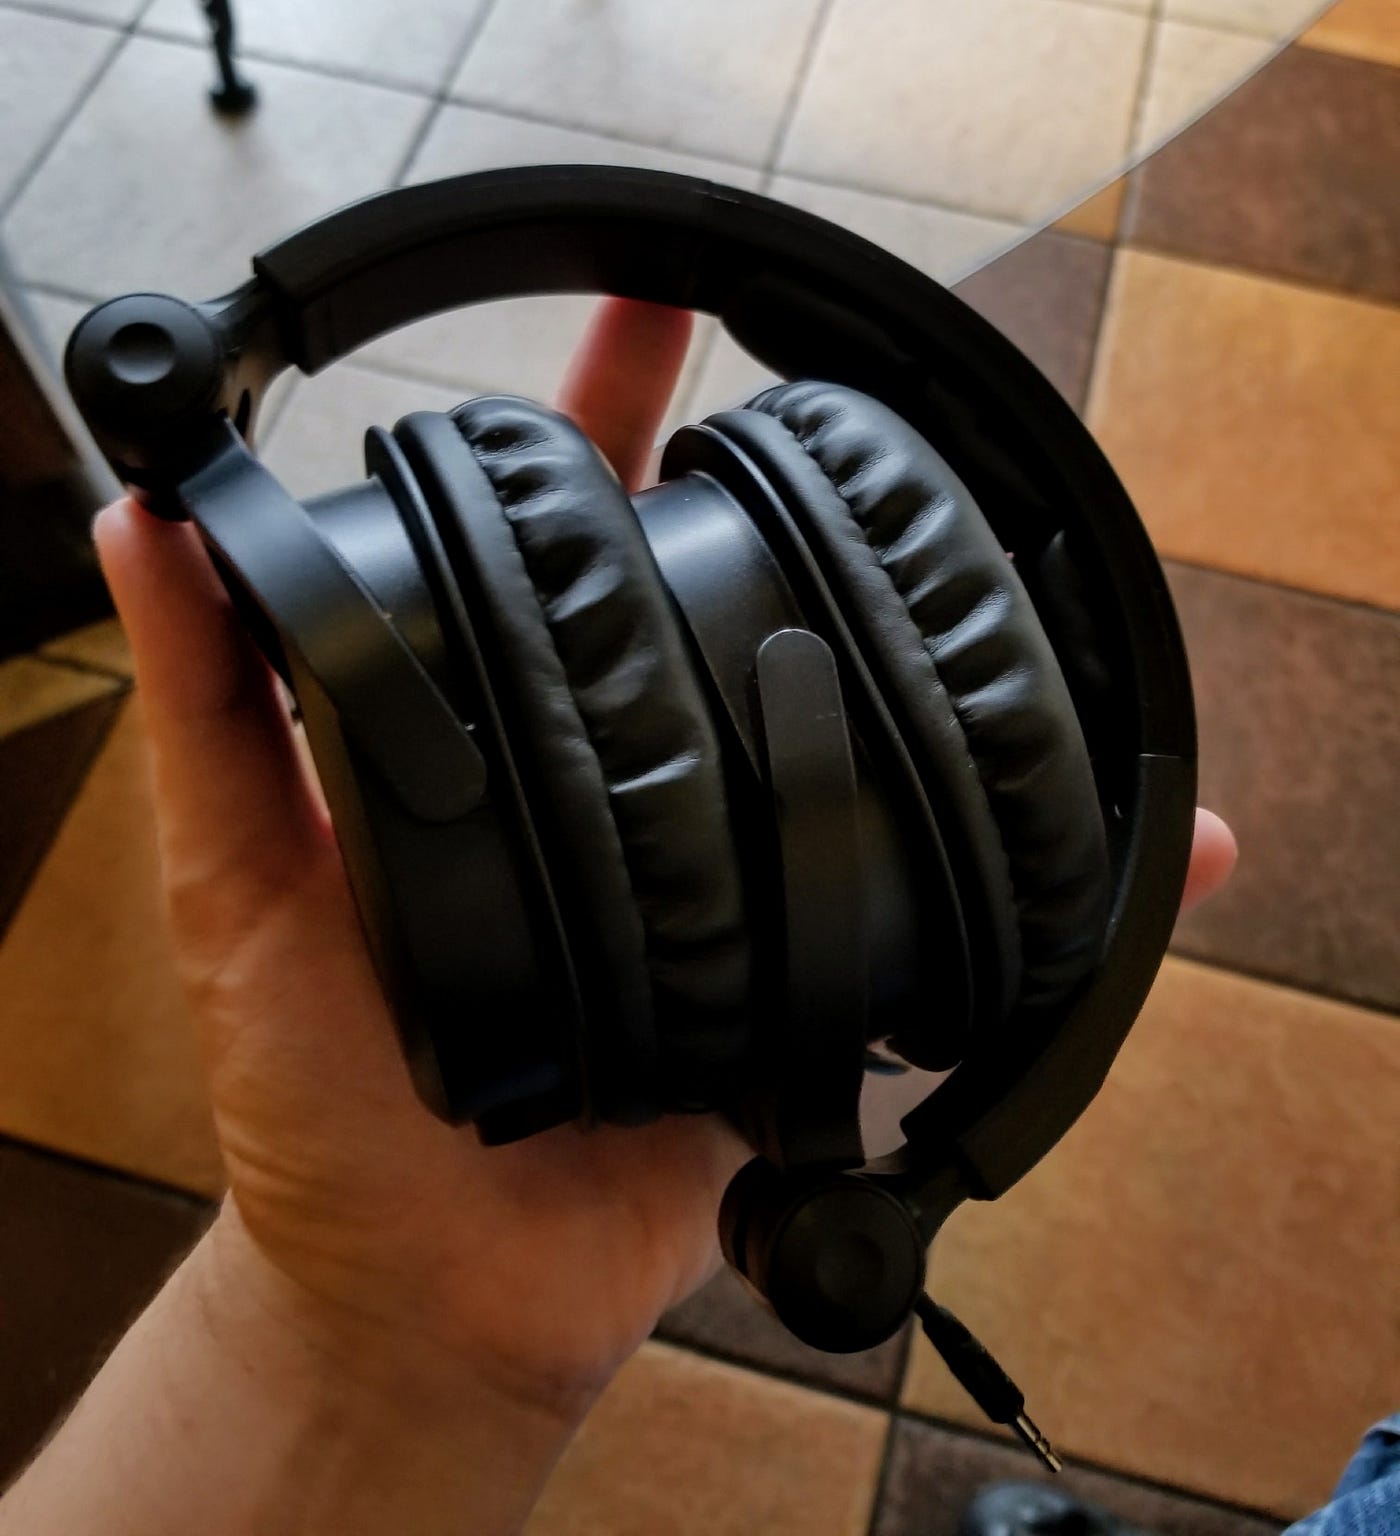 These Speak to Me on an Emotional Level” — Beyerdynamic DT 770 Pro 250 Ohm  Review, by Alex Rowe